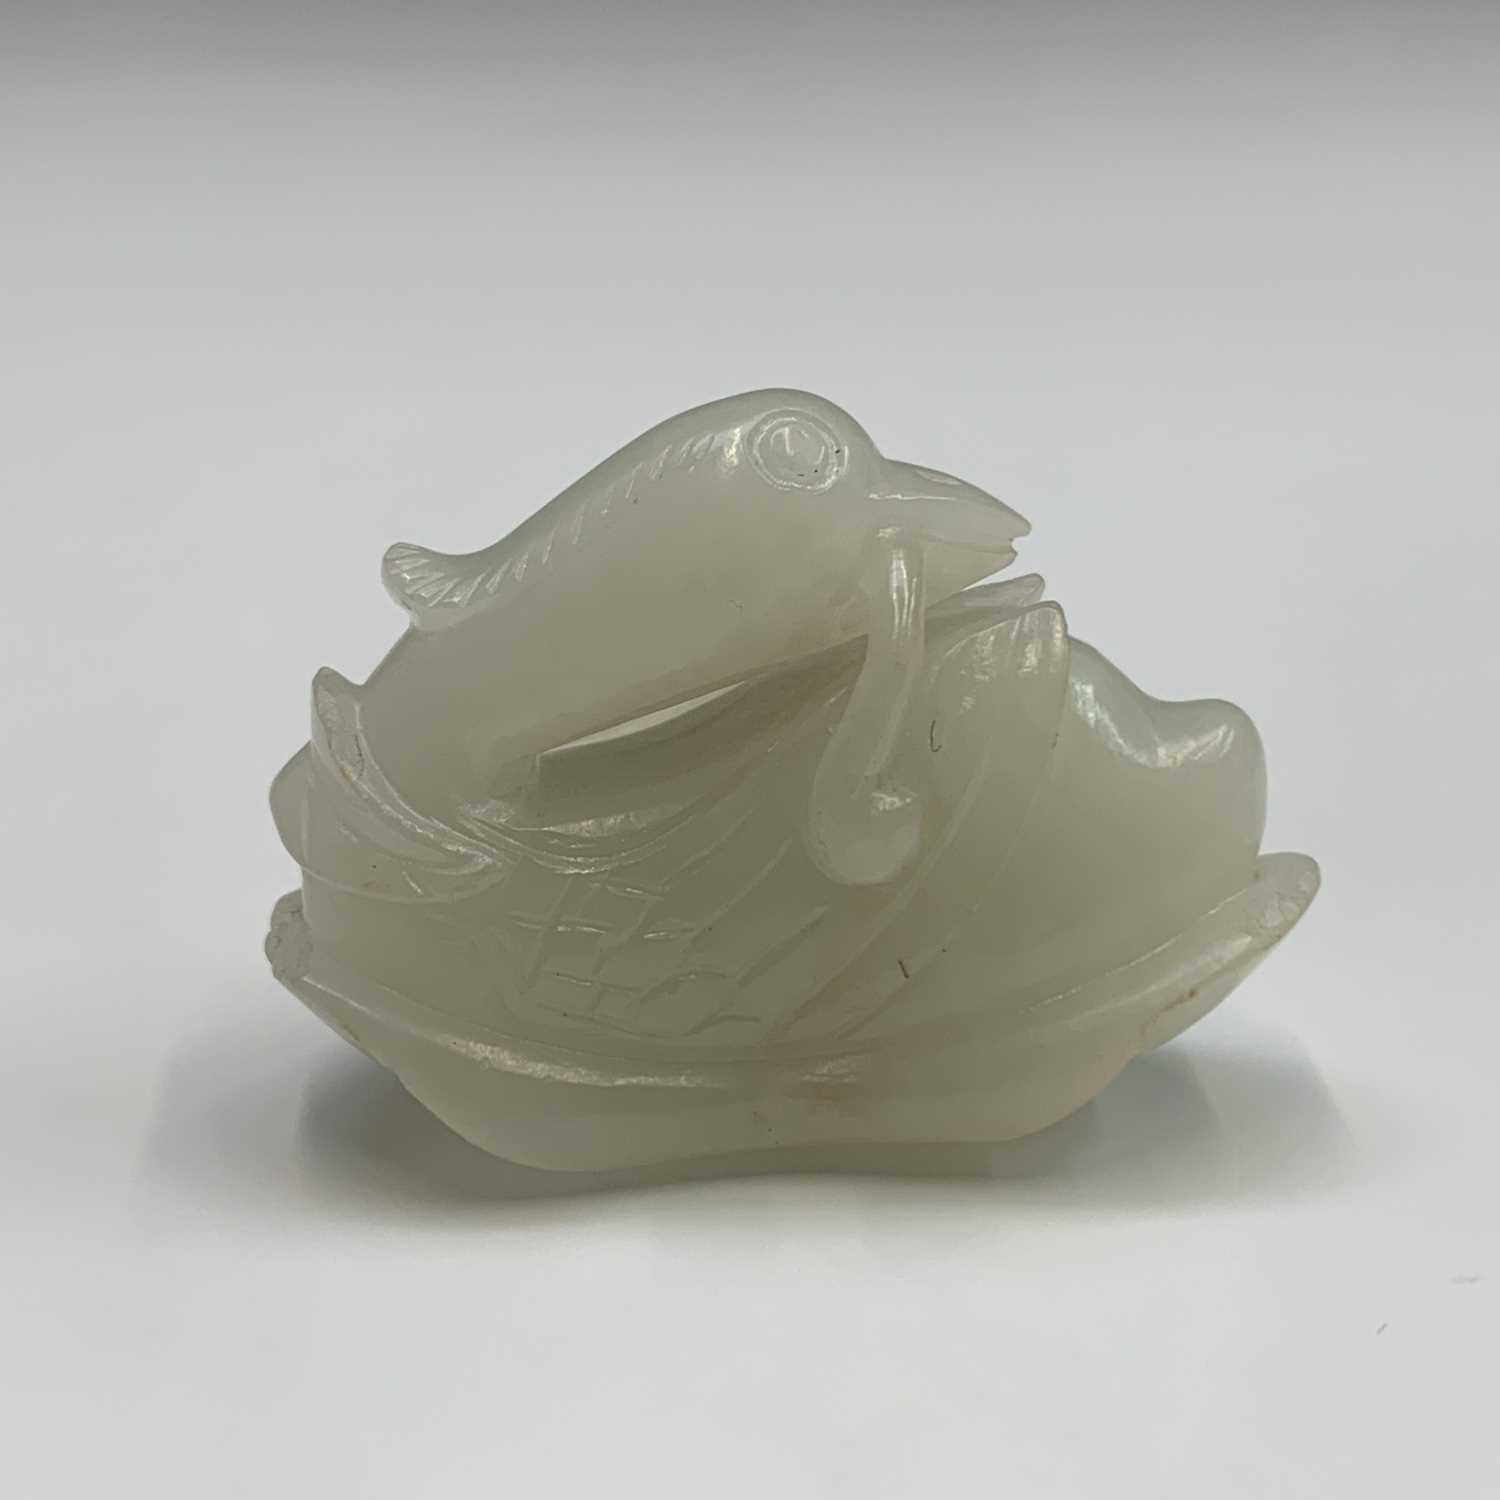 A small Chinese white jade carving of a duck, Qing dynasty, 19th century, height 3cm, width 4.5cm. - Image 5 of 11